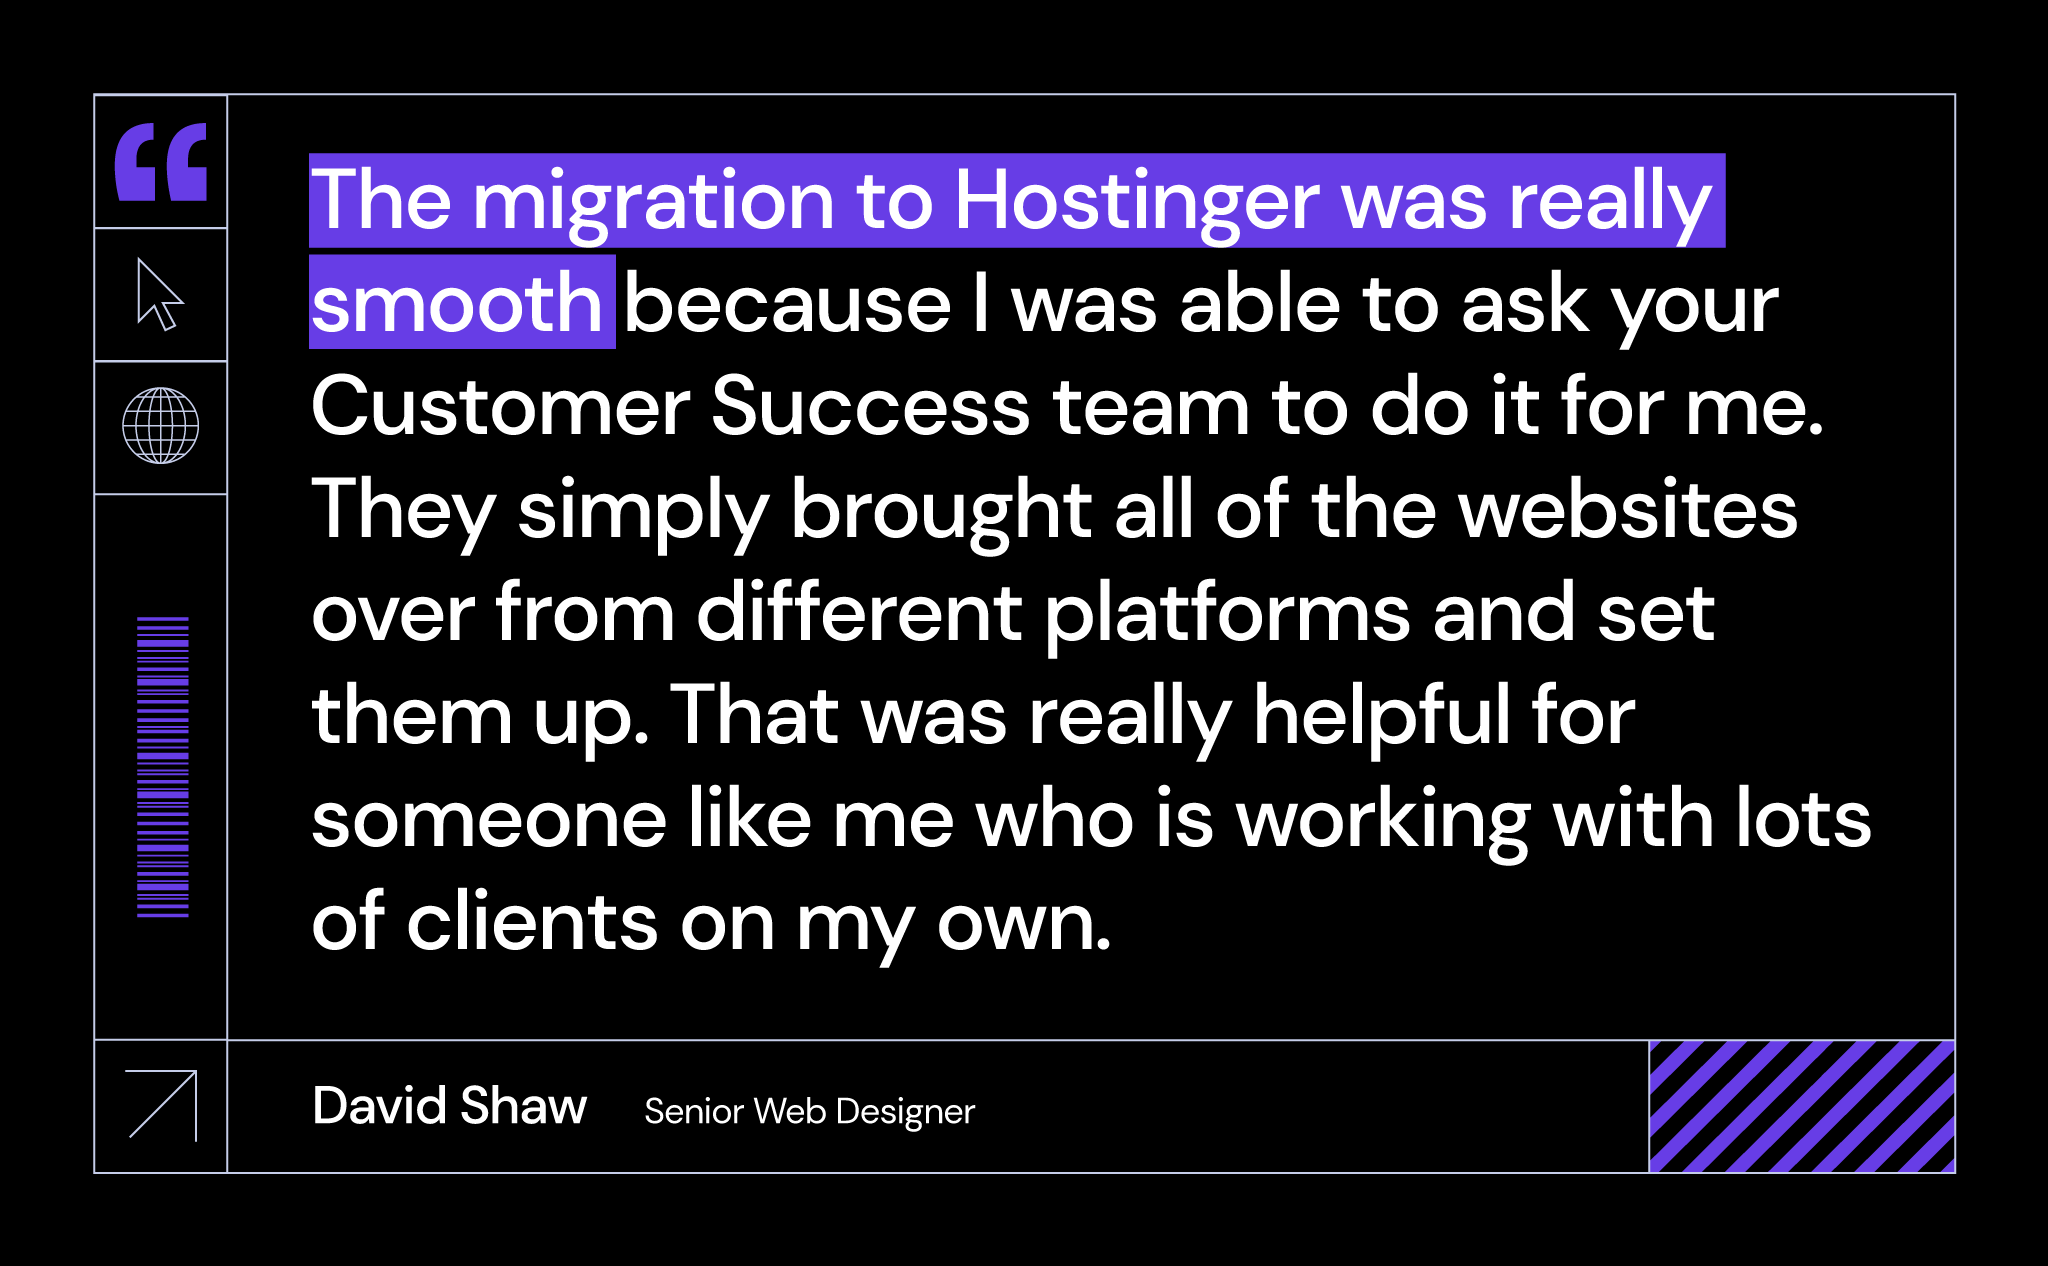 David Shaw of Creative Graphics UK sharing his positive migration experience to Hostinger's services